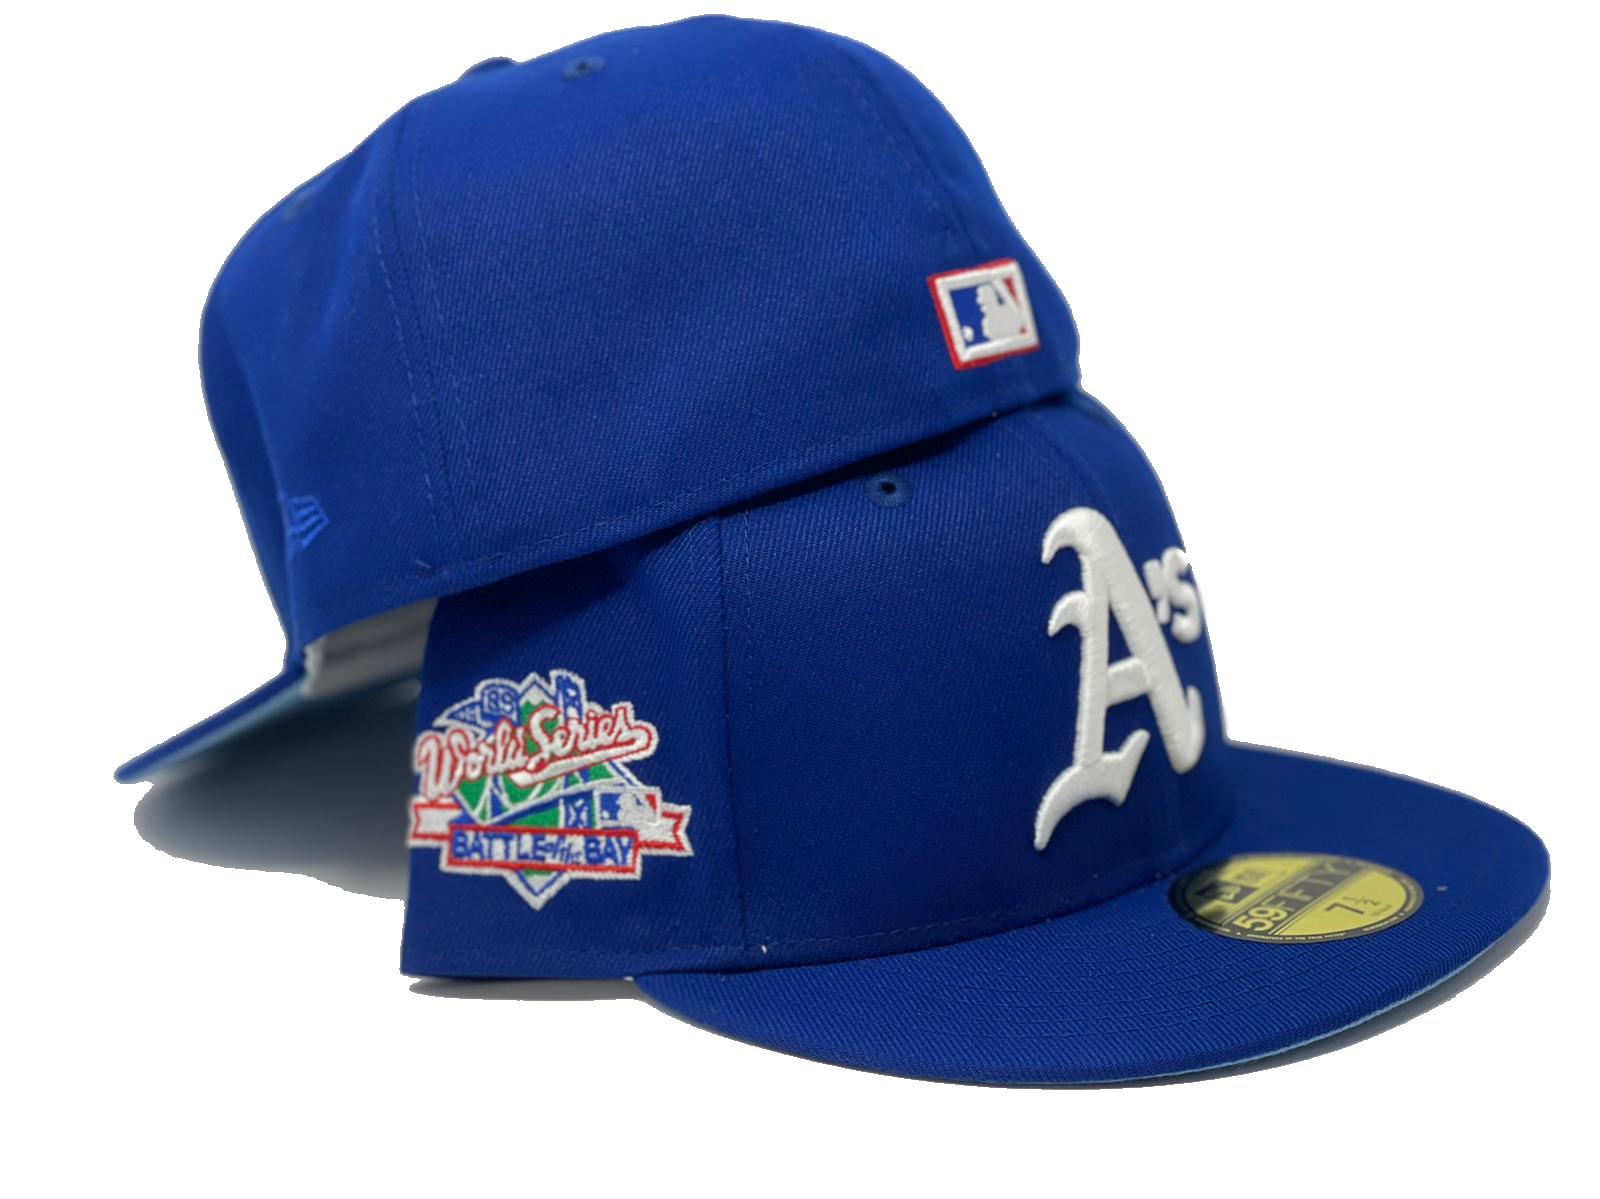 Blue Jewel Oakland Athletics 1989 Battle of the Bay New Era Fitted – Sports  World 165